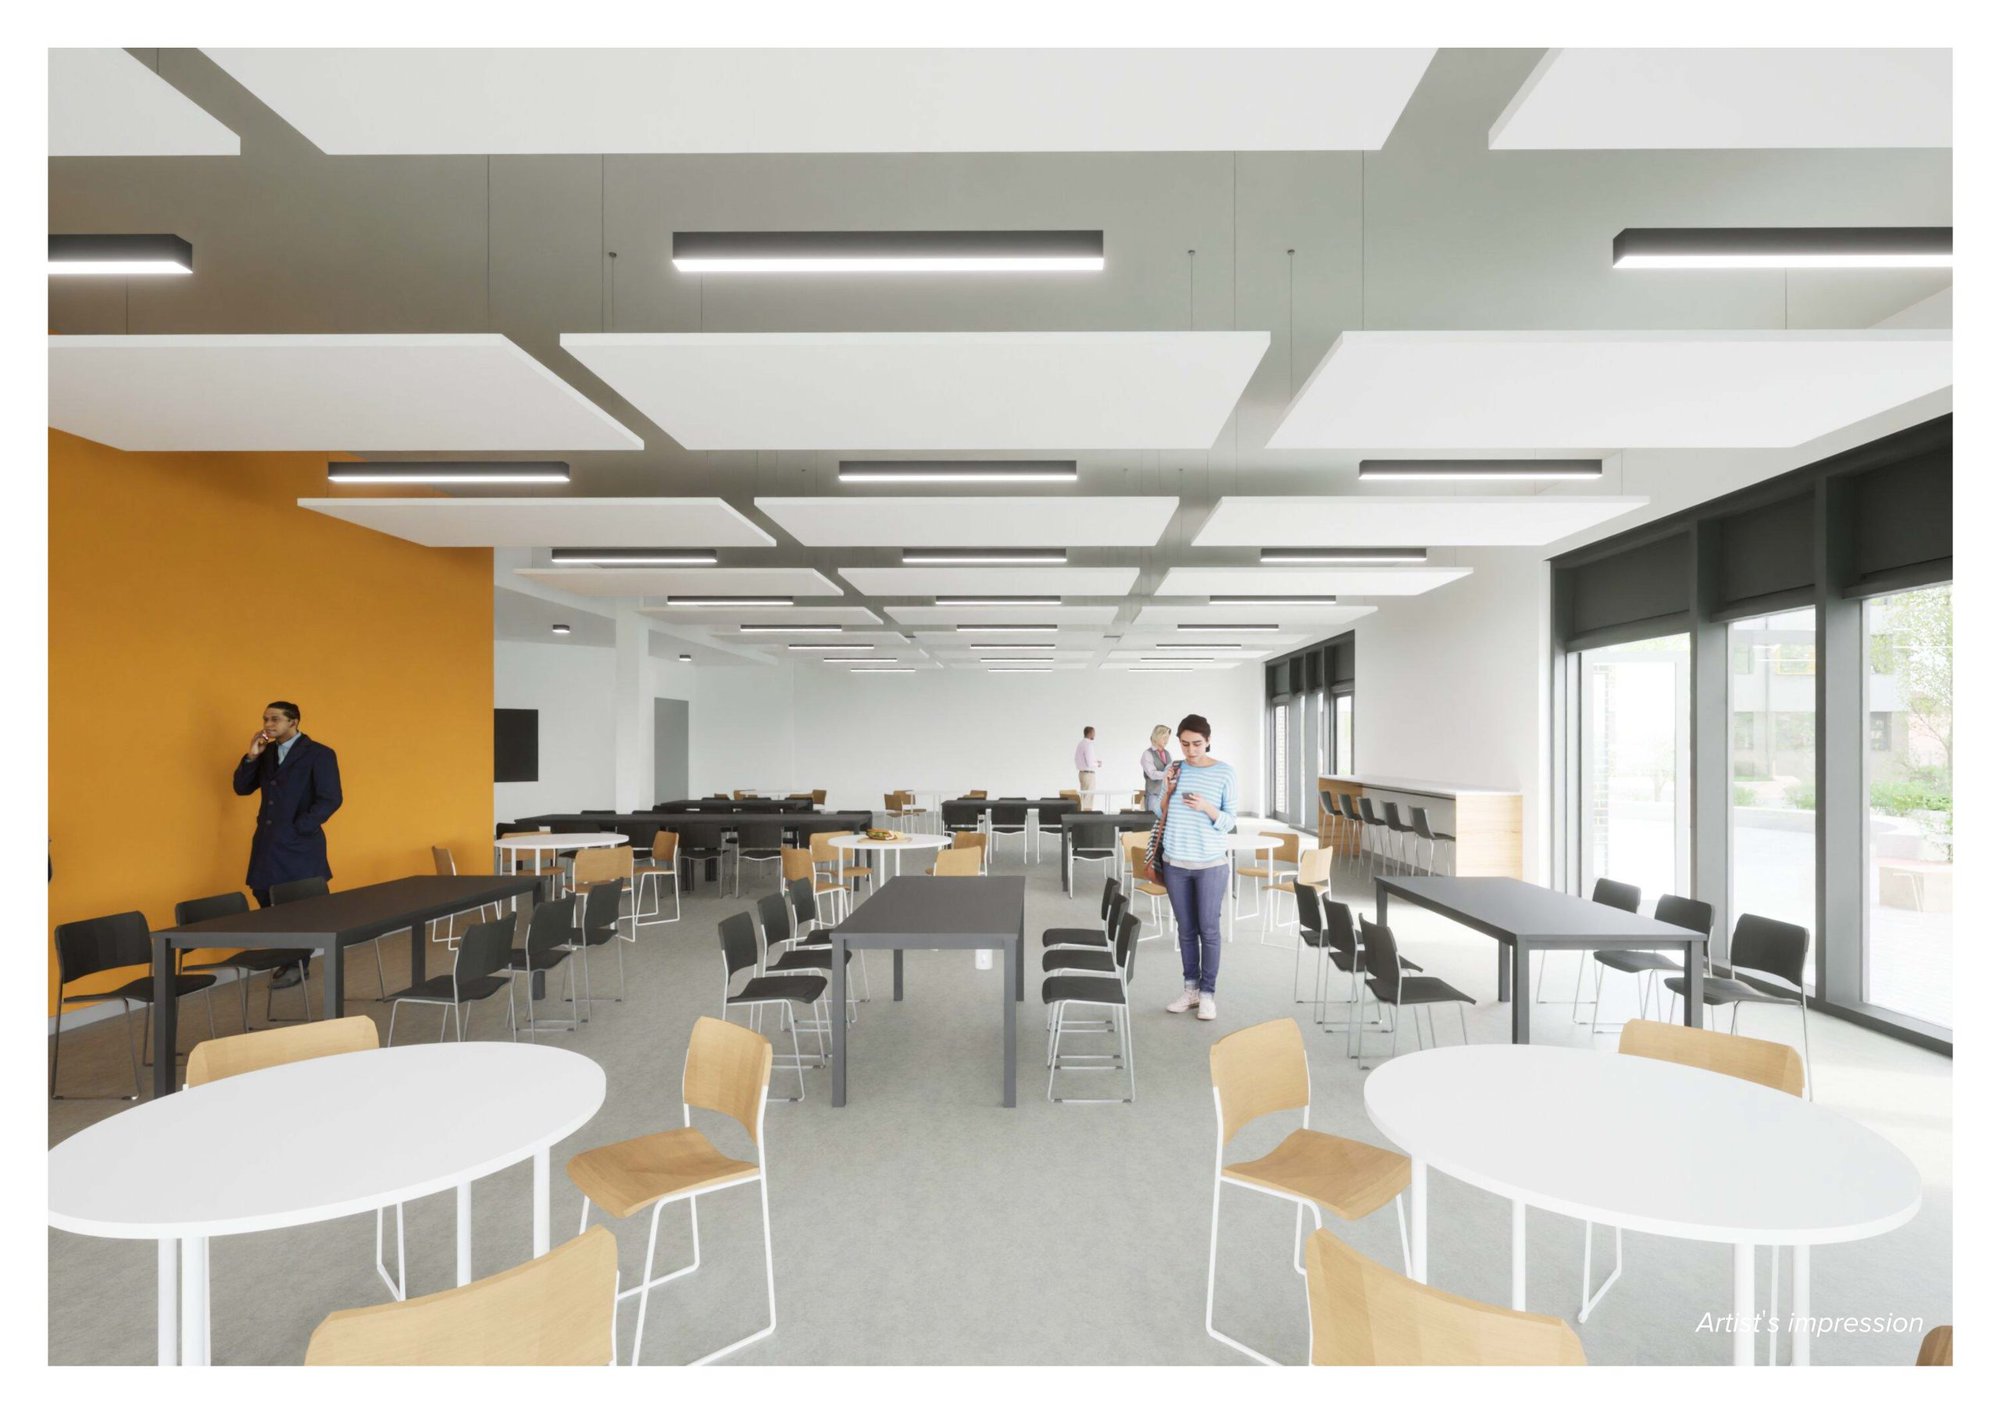 An artist's impression of the internal dining area at East Coast College's Great Yarmouth Campus. Image LSI Architects